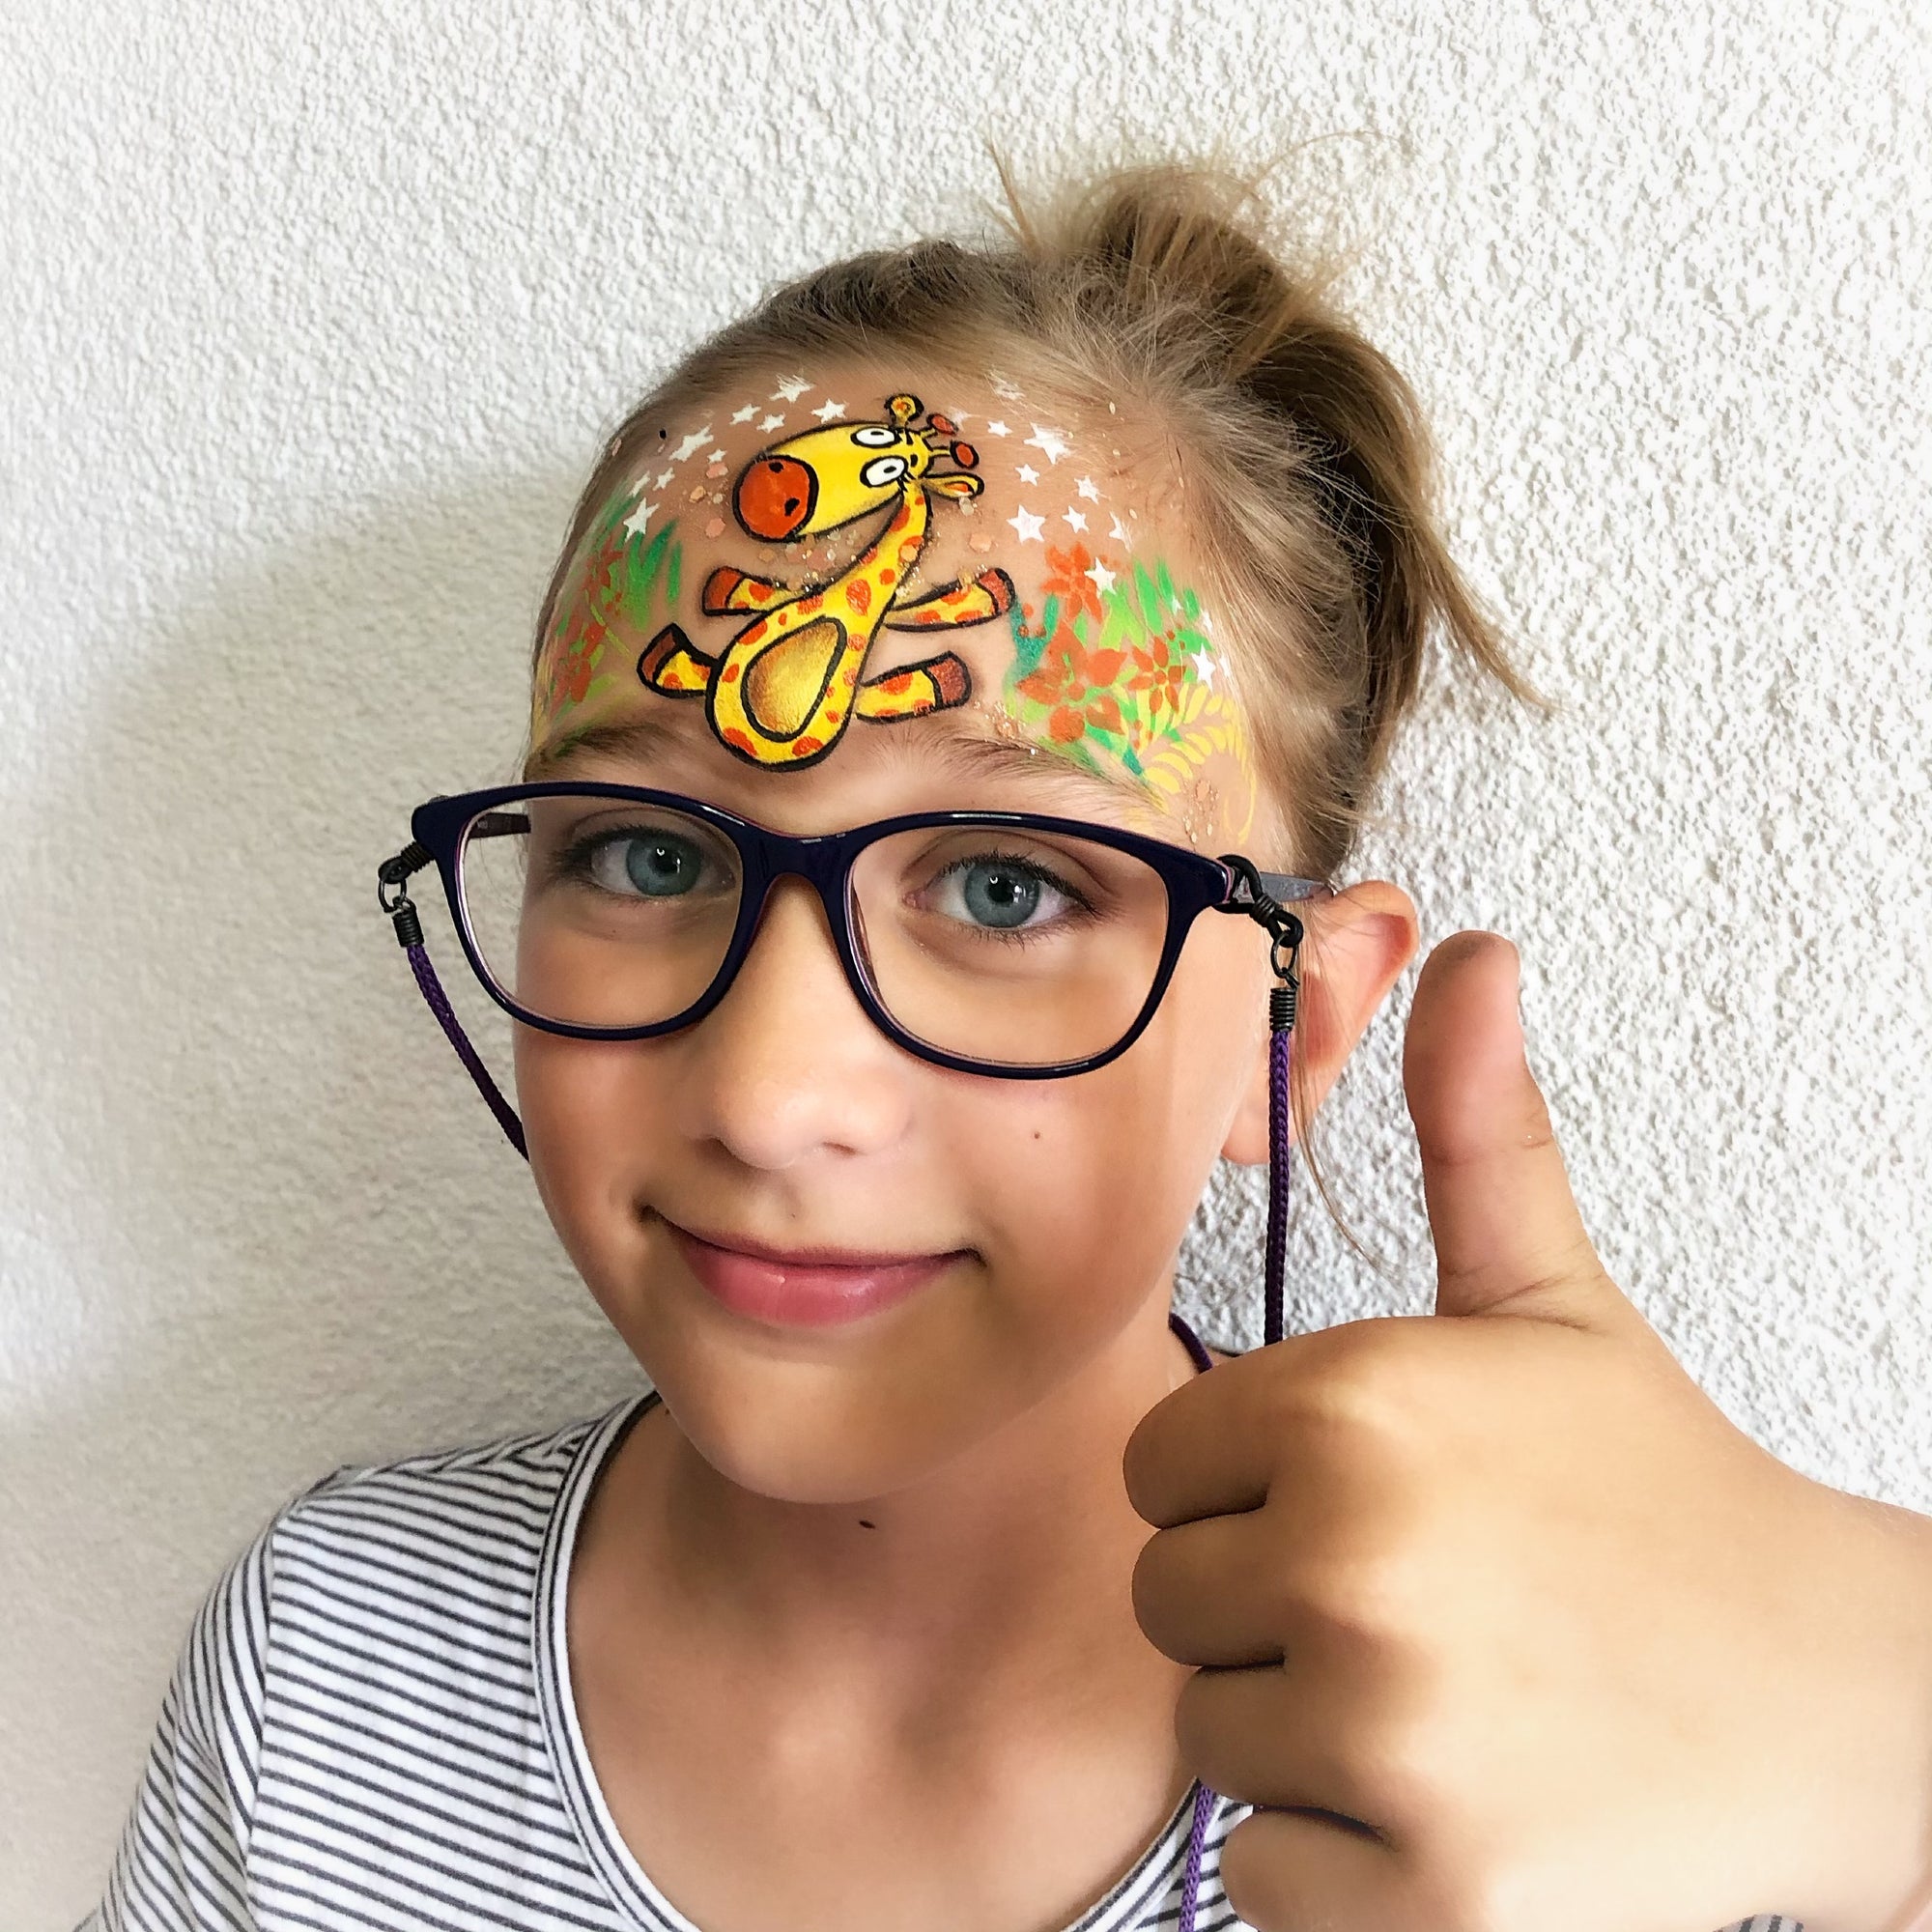 Painting With Glasses - Cute Giraffe Design by Marina